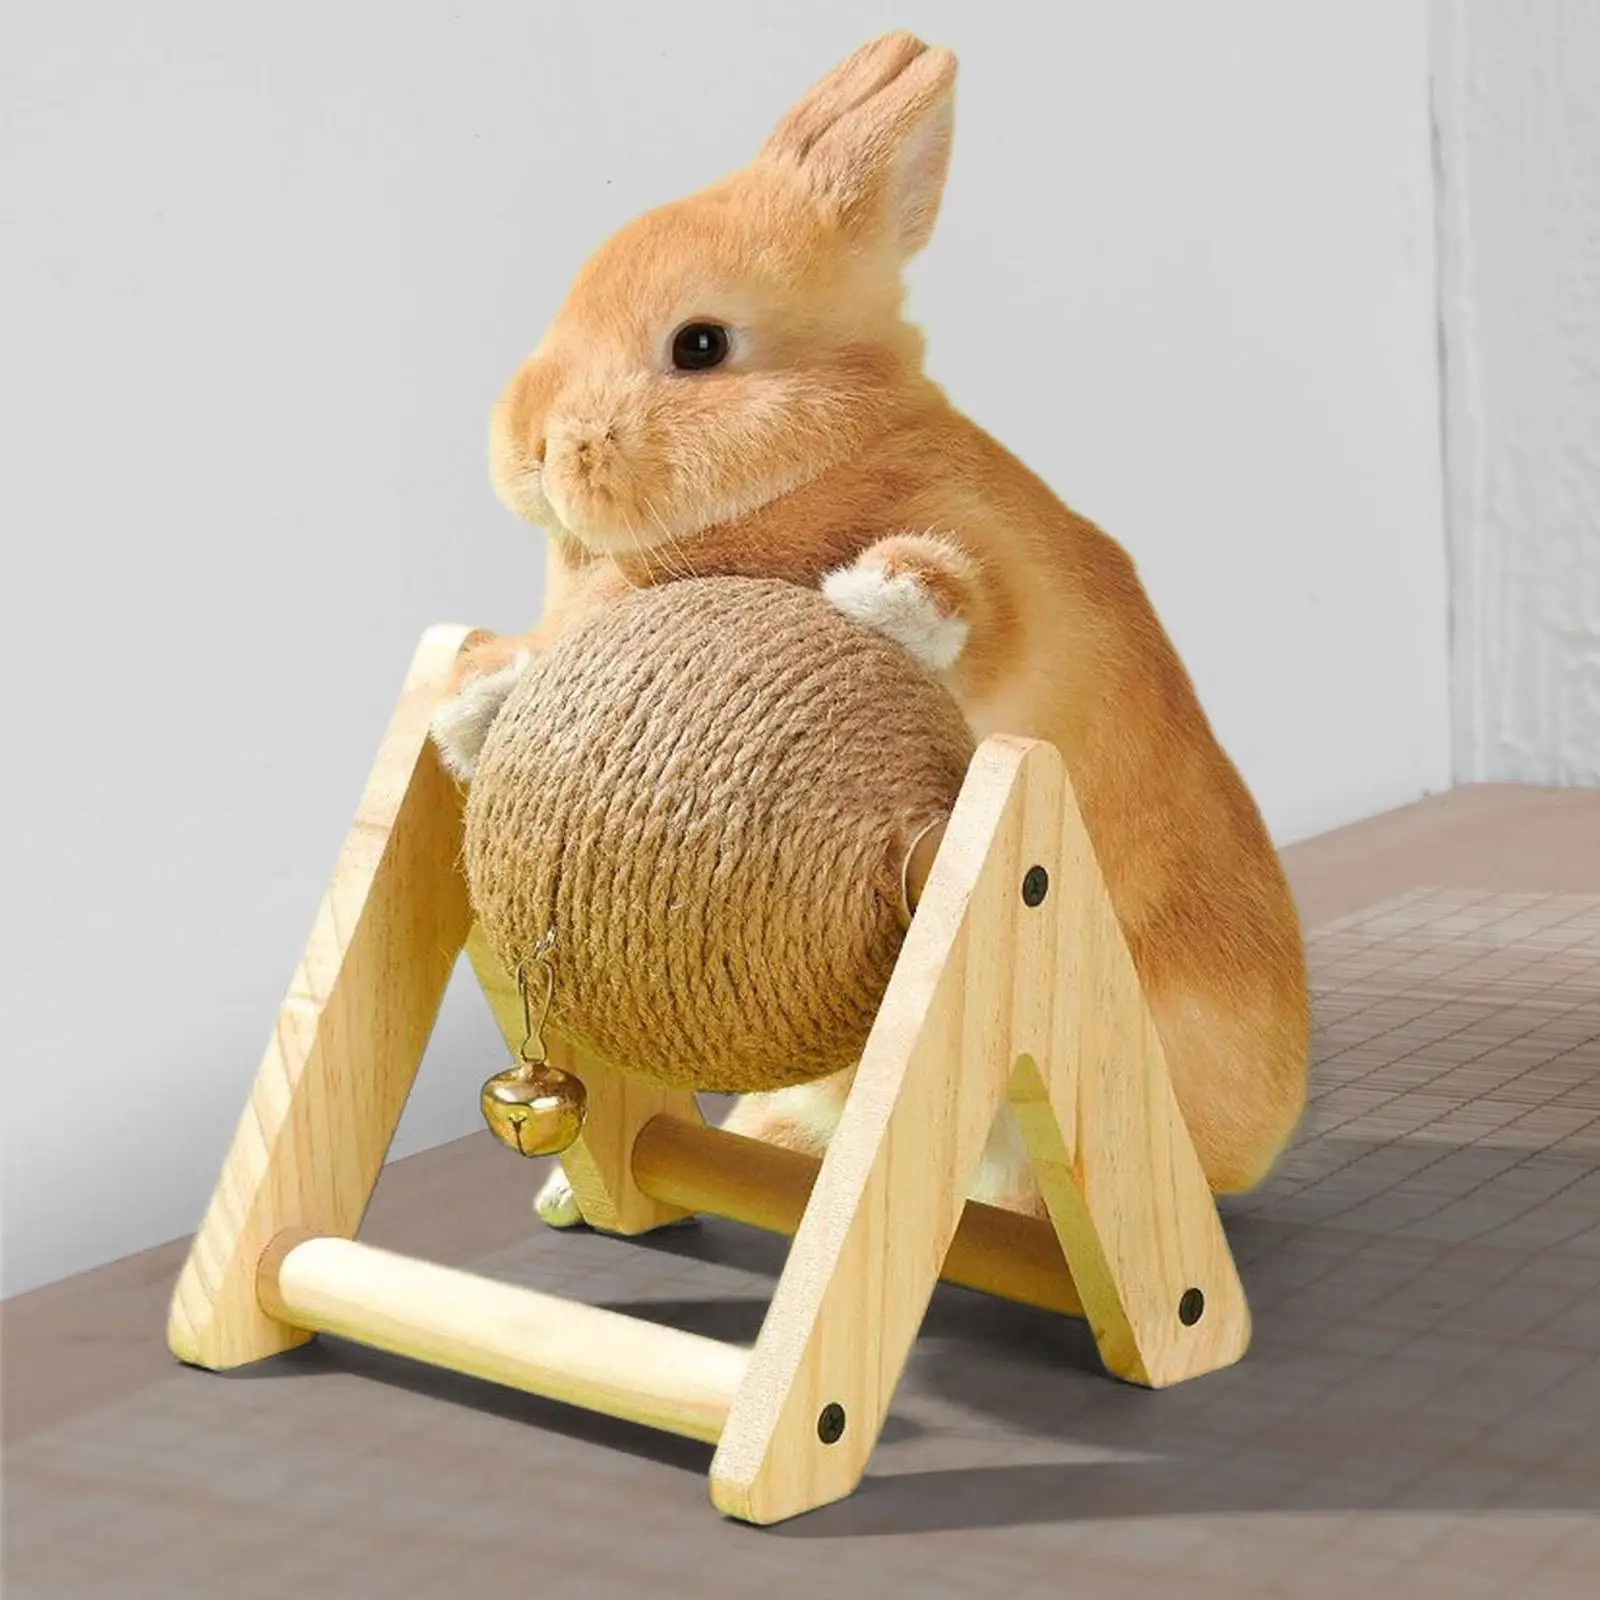 Rabbit Scratch Toy Sisal Rabbit Scratching Ball Durable Stable Interactive Toy for Small Animals Rabbits Kitty Kittens Bunnies 